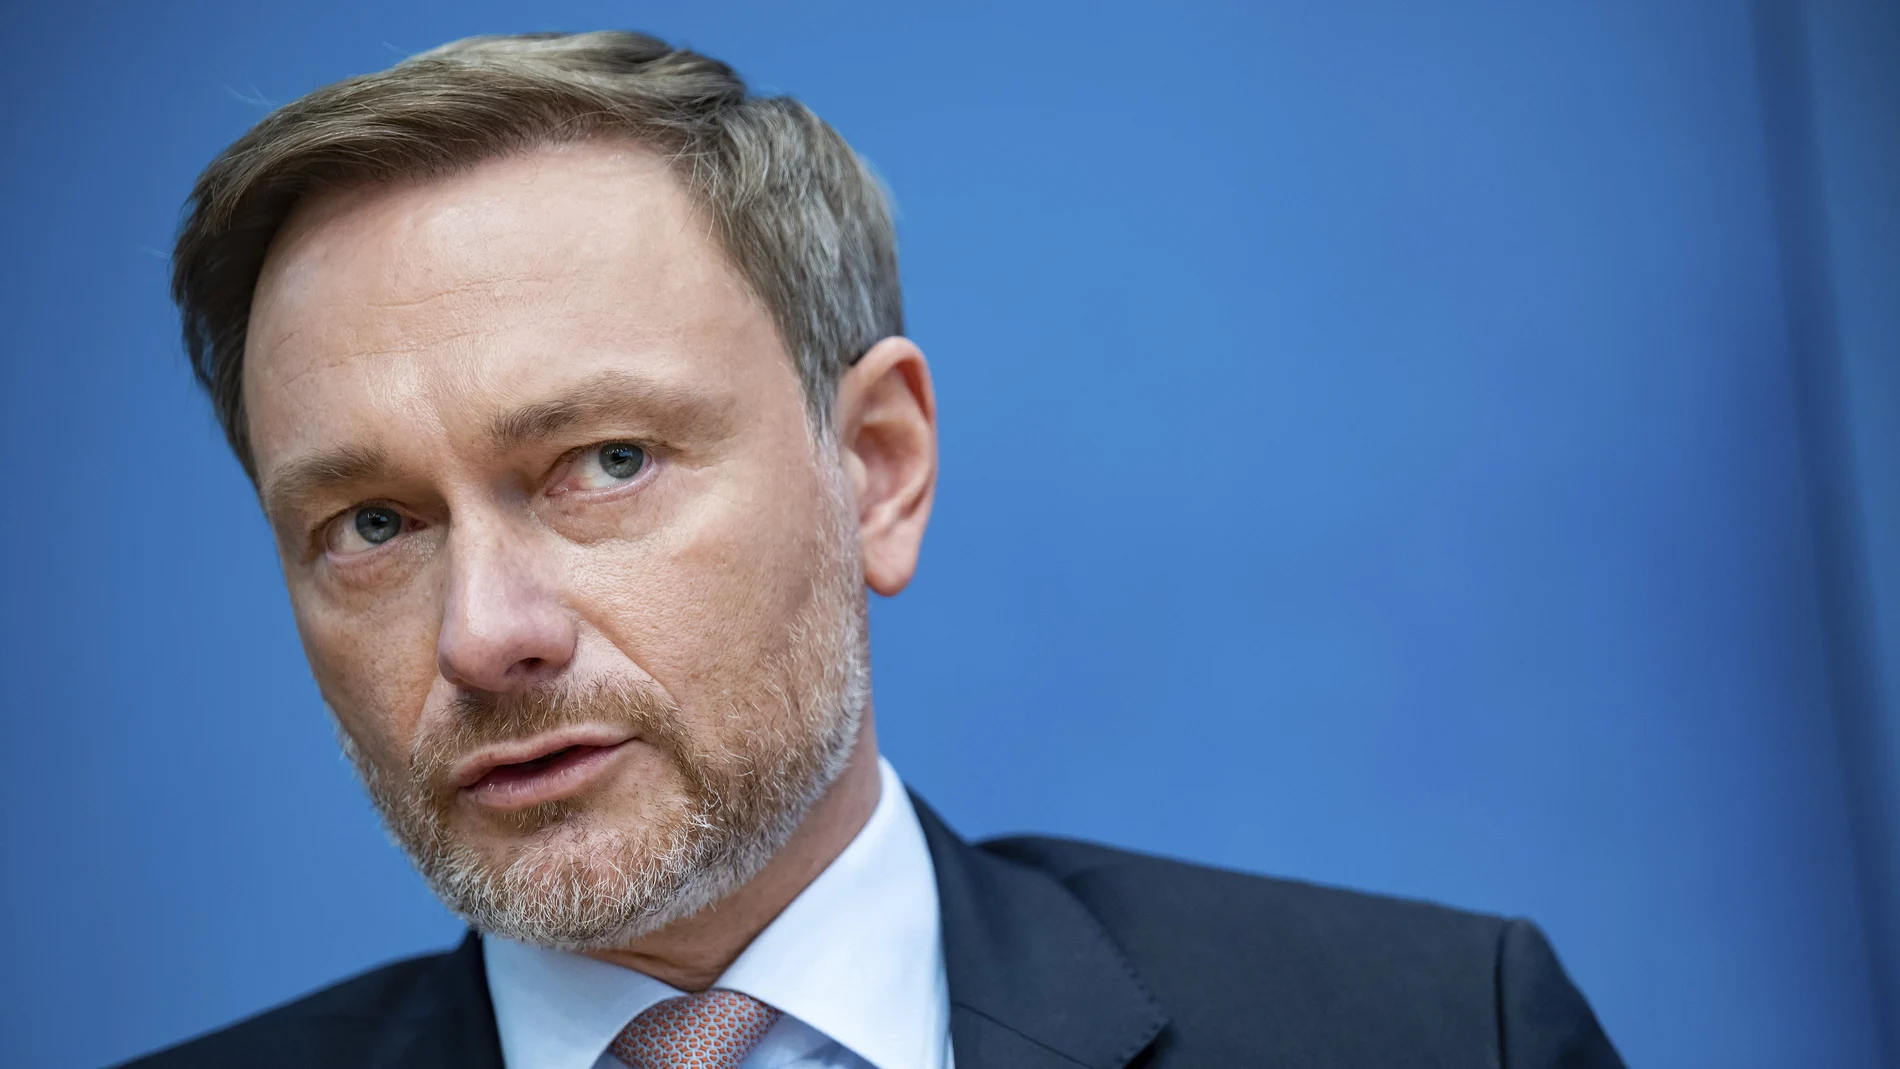 Christian Lindner,designated German Minister of Finance, speaks at a news conference in Berlin, Germany, Tuesday, Dec. 7, 2021 The leader of the pro-business Free Democrats will hold the government's purse strings as finance minister. Lindner dominates his party, which he led back into parliament in 2017 after a four-year absence. (Bernd Von Jutrczenka/dpa via AP)